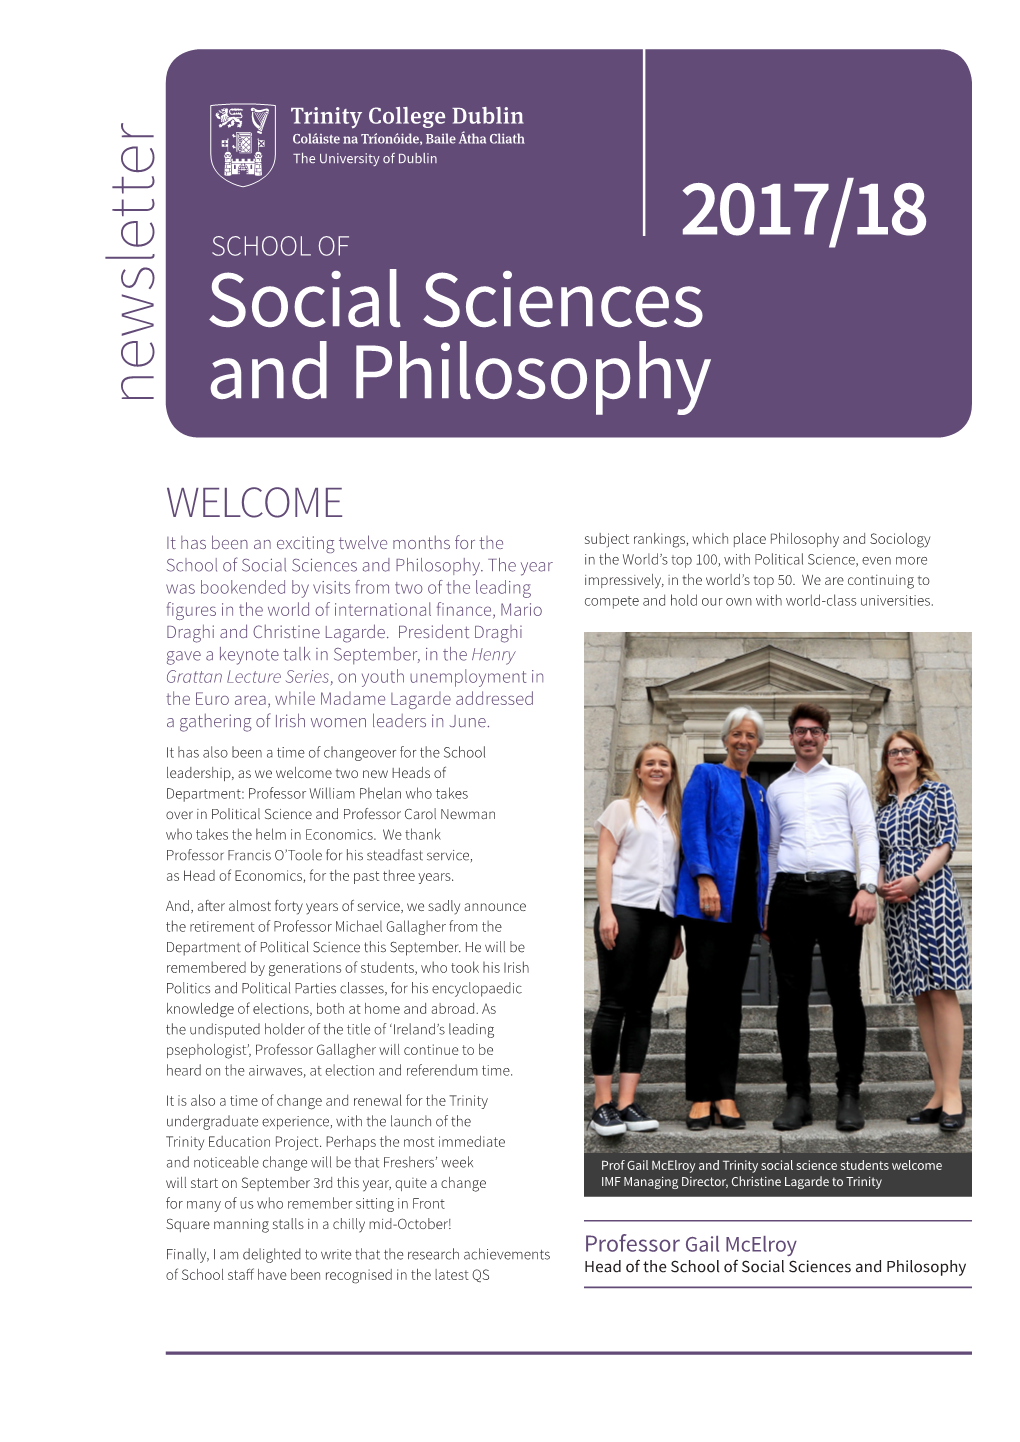 Social Sciences and Philosophy 2017/18